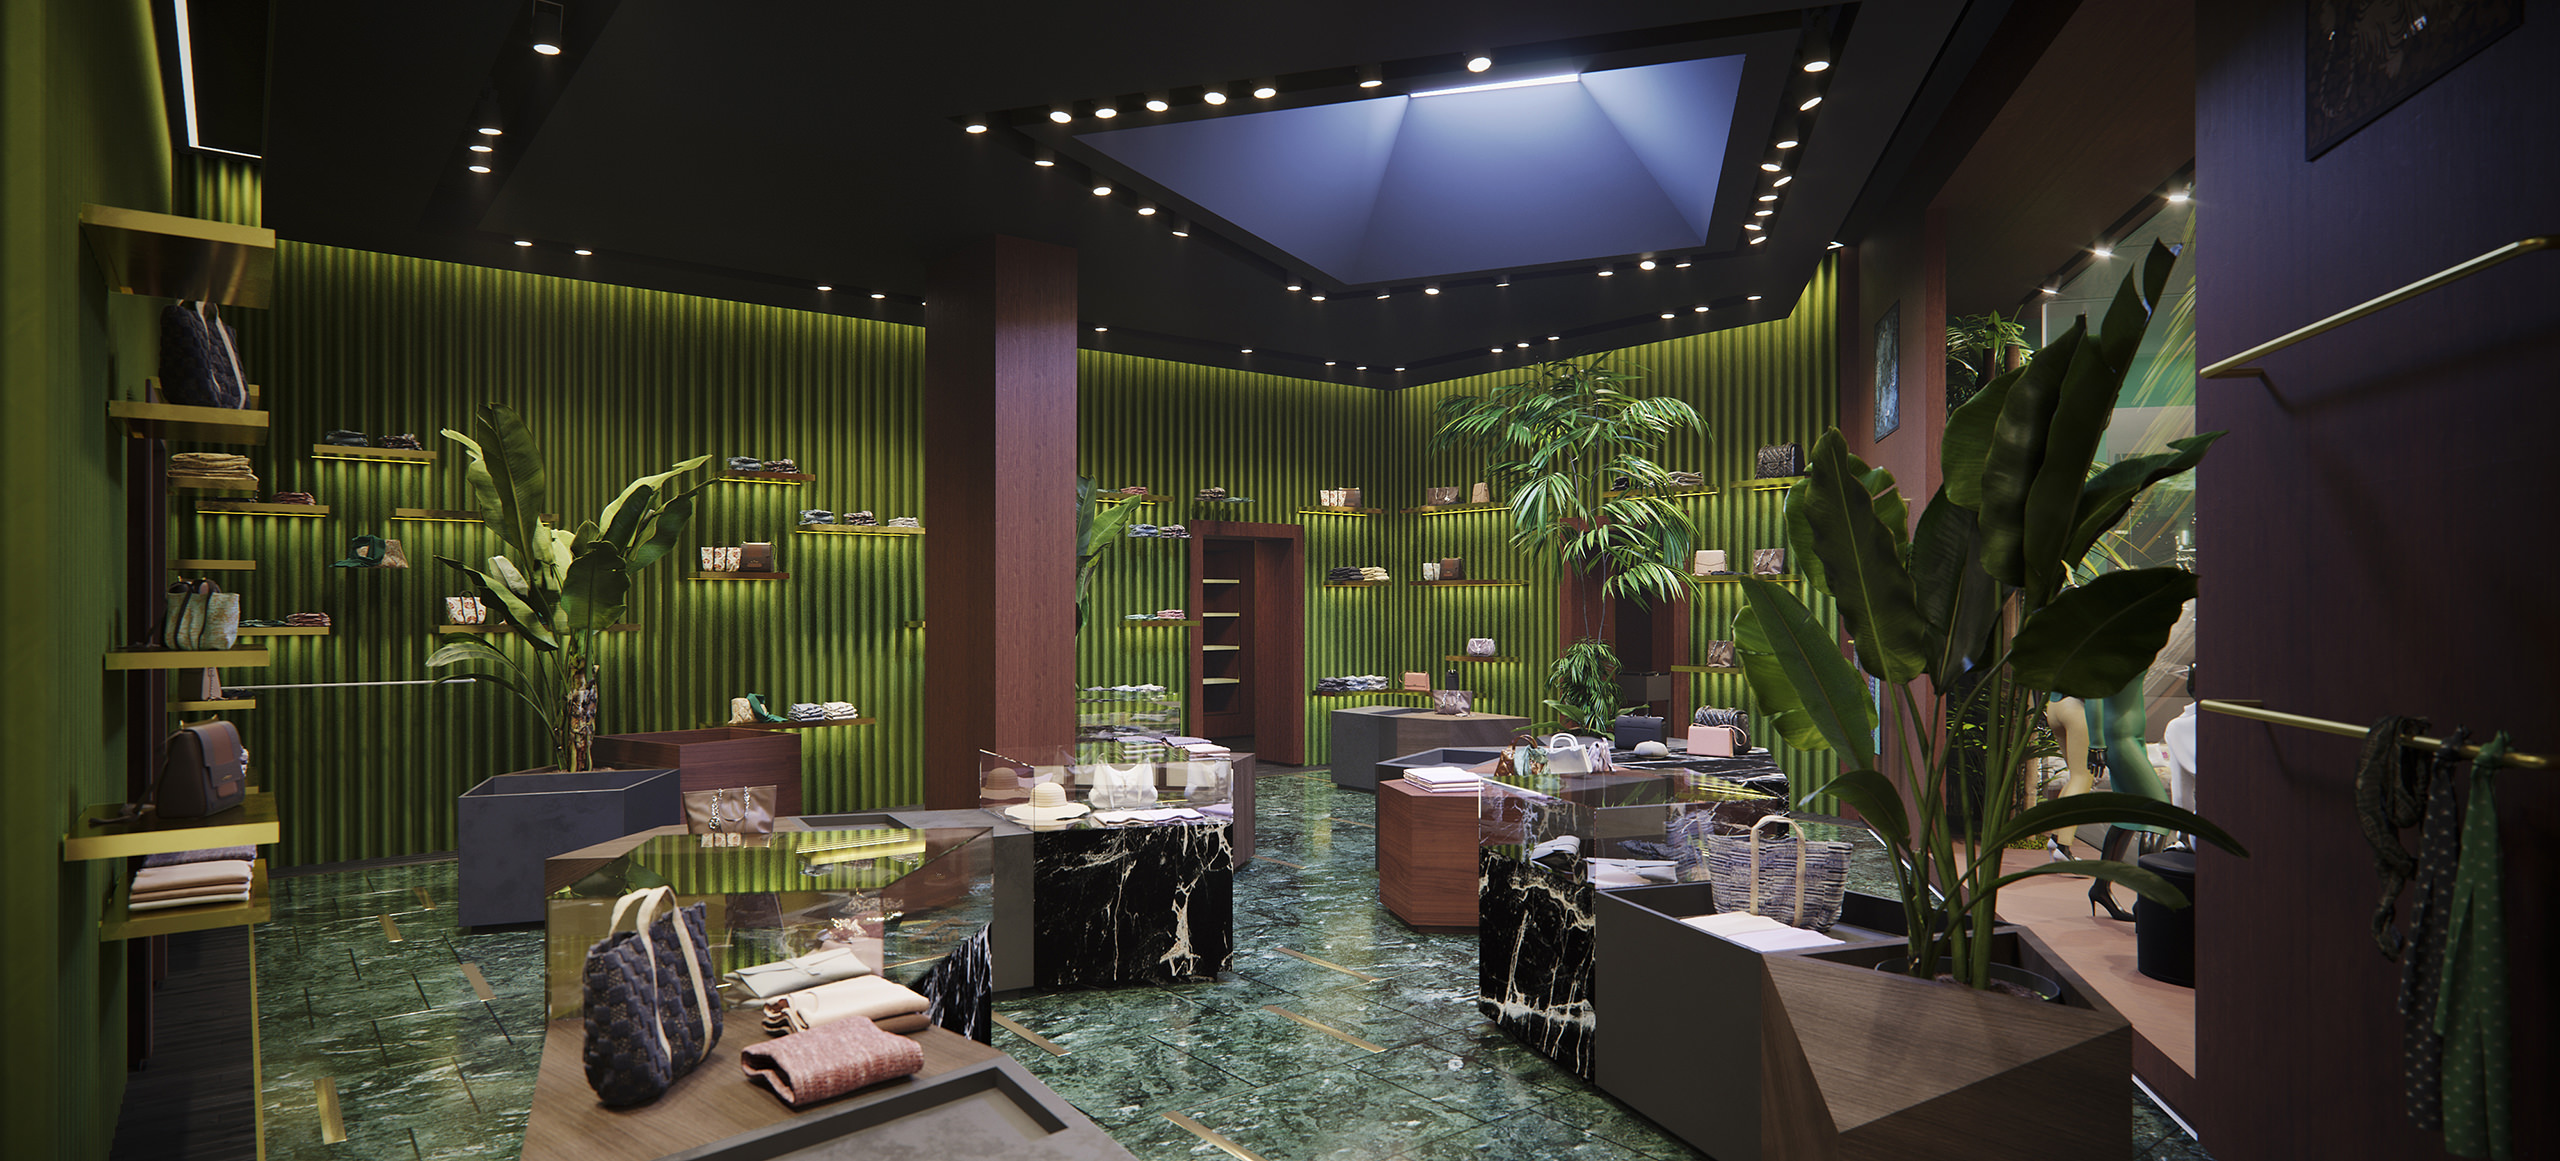 Interior 3D showroom rendering in Thailand with a garden-like vibe